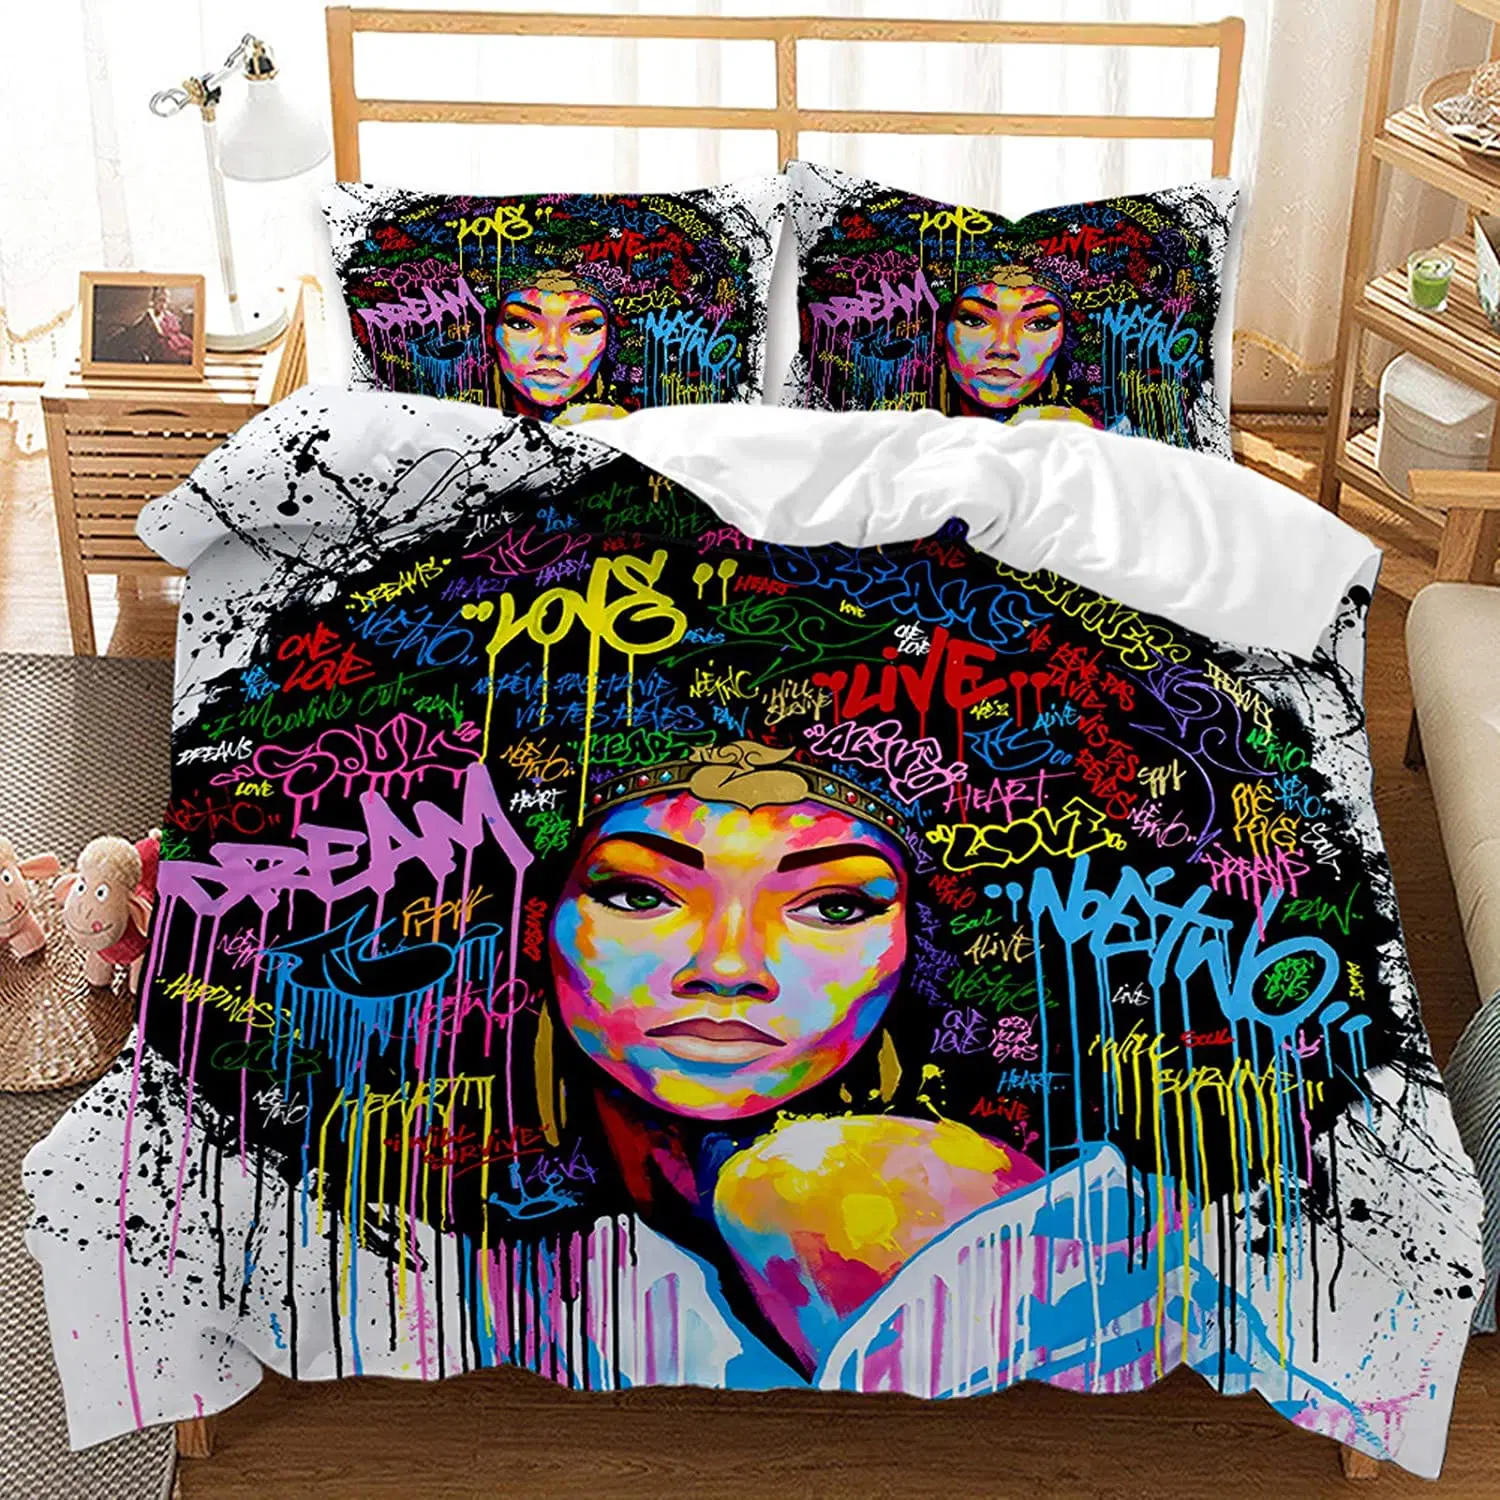 Bedding Set For Teens Funky Bedding For Teens Comes in a Variety of Sizes From Twin to Queen 11 - Bedding Set For Teens - Funky Bedding For Teens Comes in a Variety of Sizes, From Twin to Queen